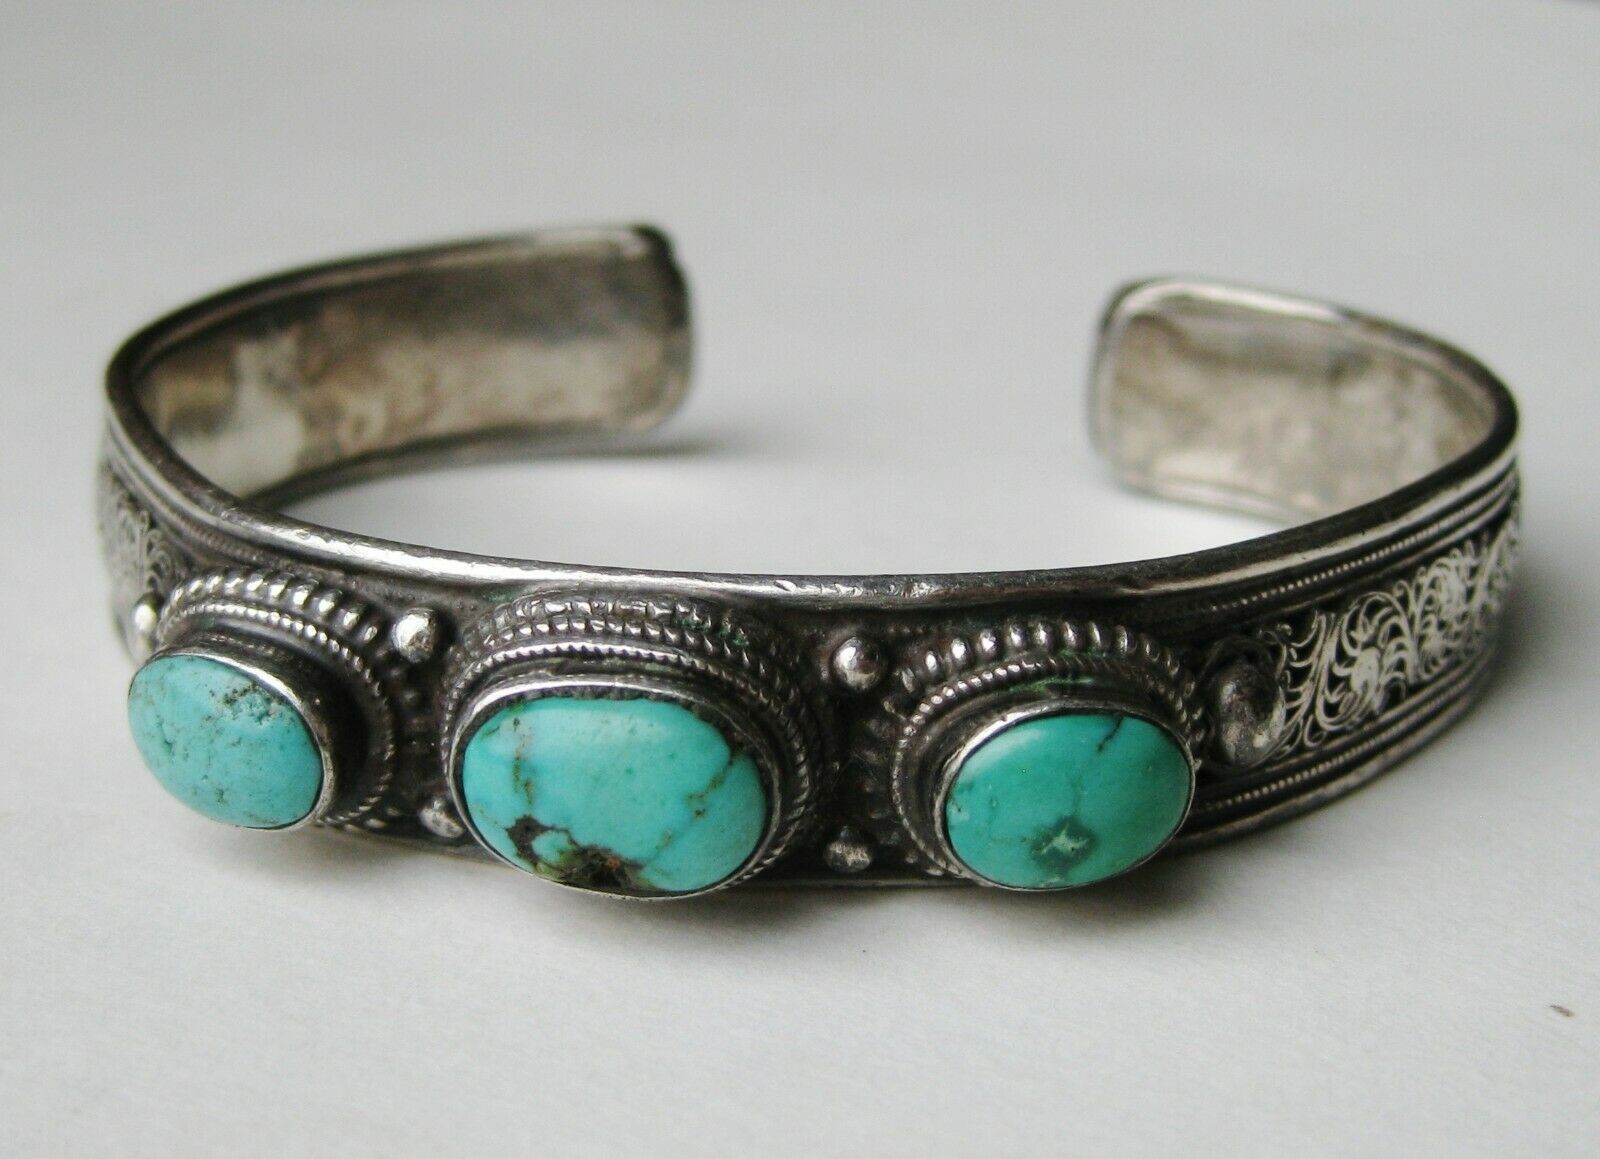 Vintage Sterling Silver Persian Turquoise Cuff Bracelet